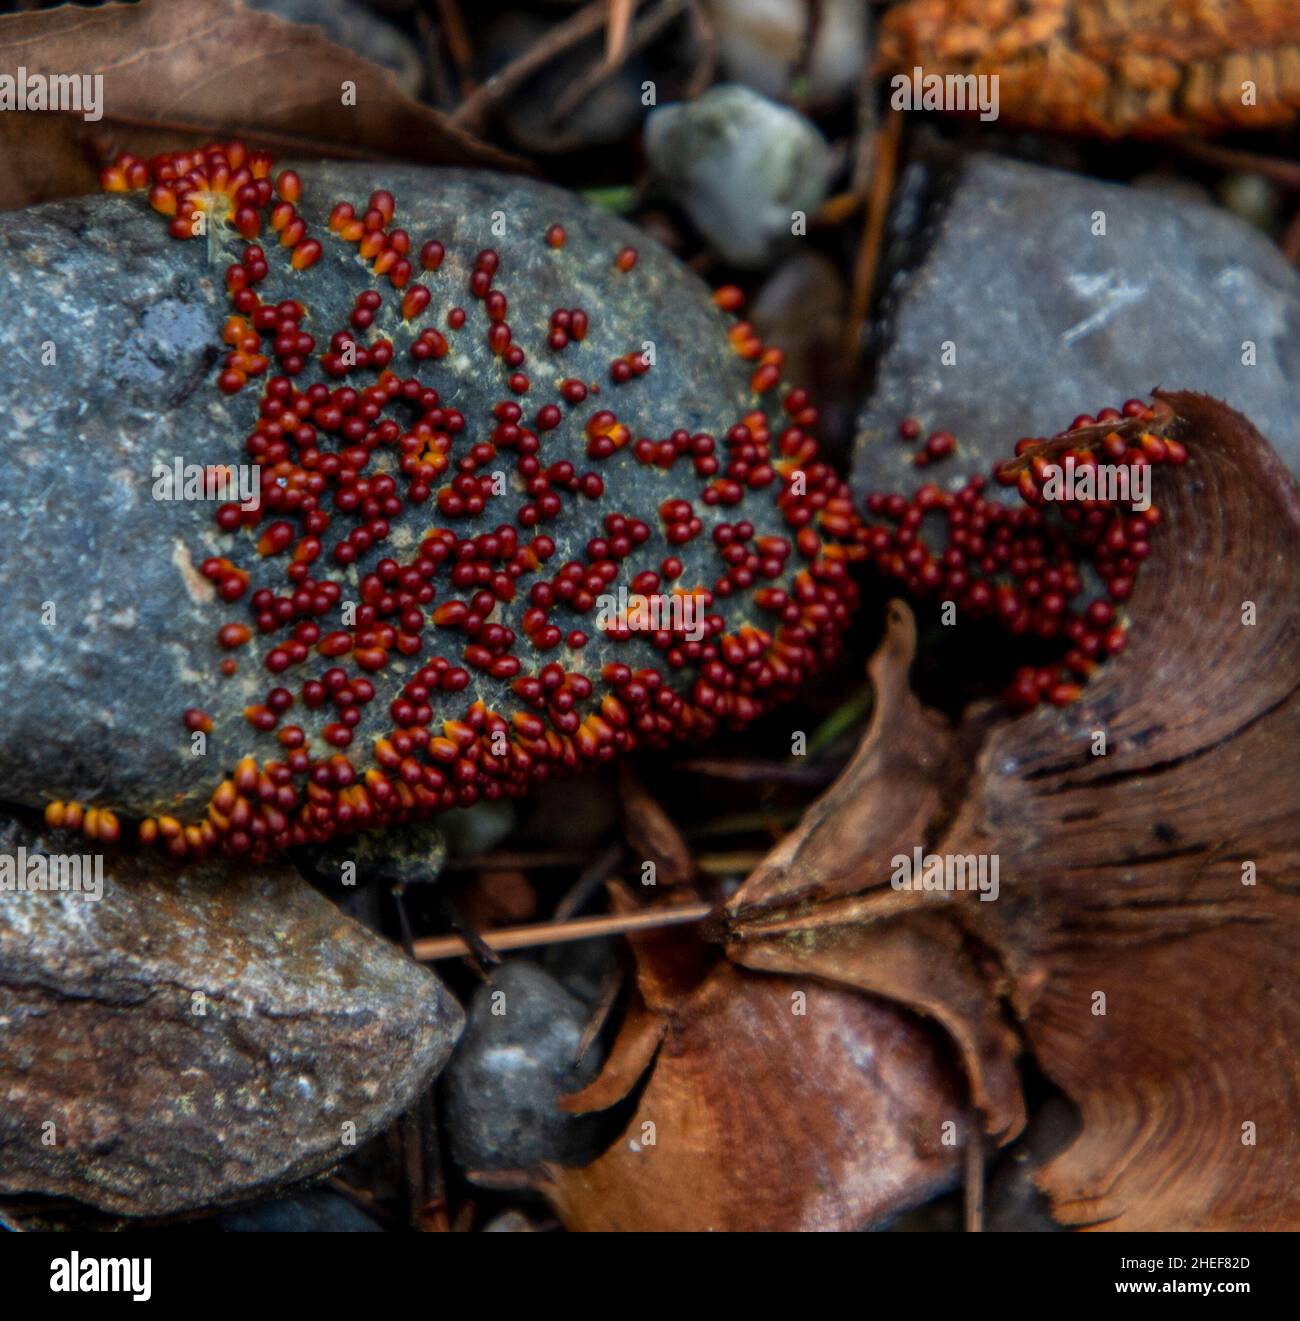 Red Slime Mold growing in a garden after heavy rains. Stock Photo